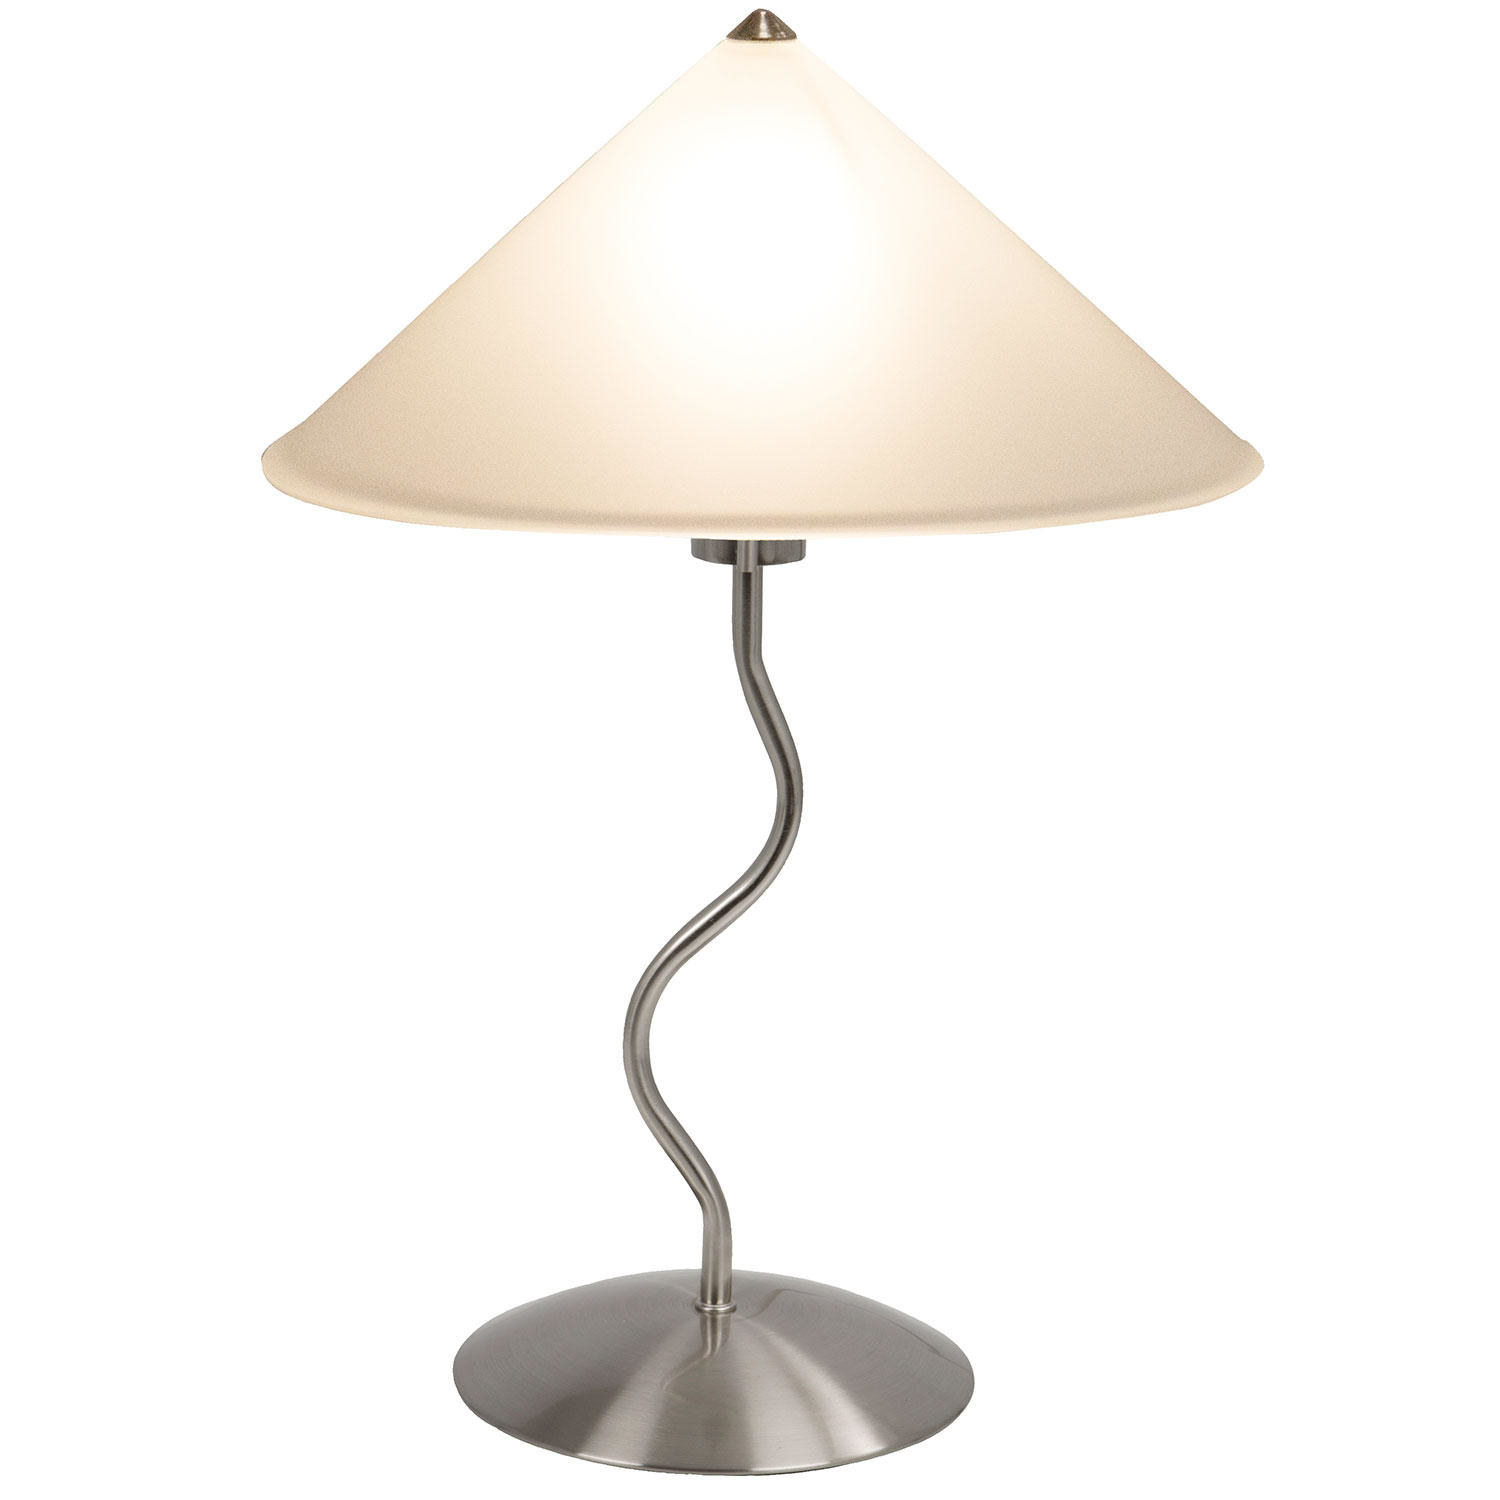 A contemporary desk lamp with three adjustable light settings